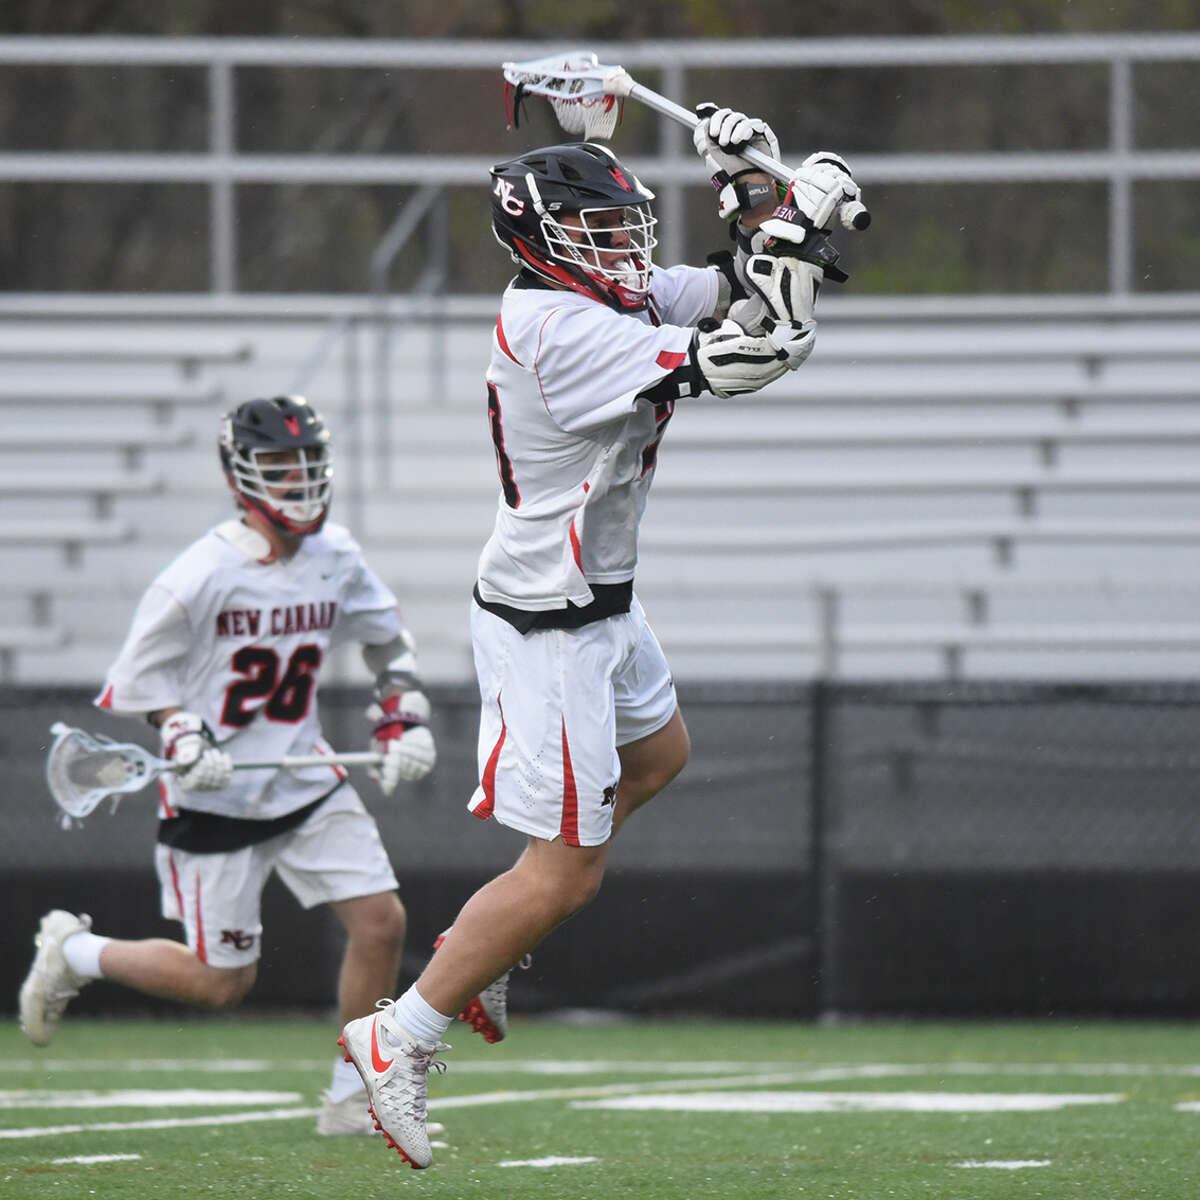 New Canaan’s Quintin O’Connell leaves his feet for a shot during a boys lacrosse game at Dunning Field in New Canaan on Thursday, April 25, 2019.